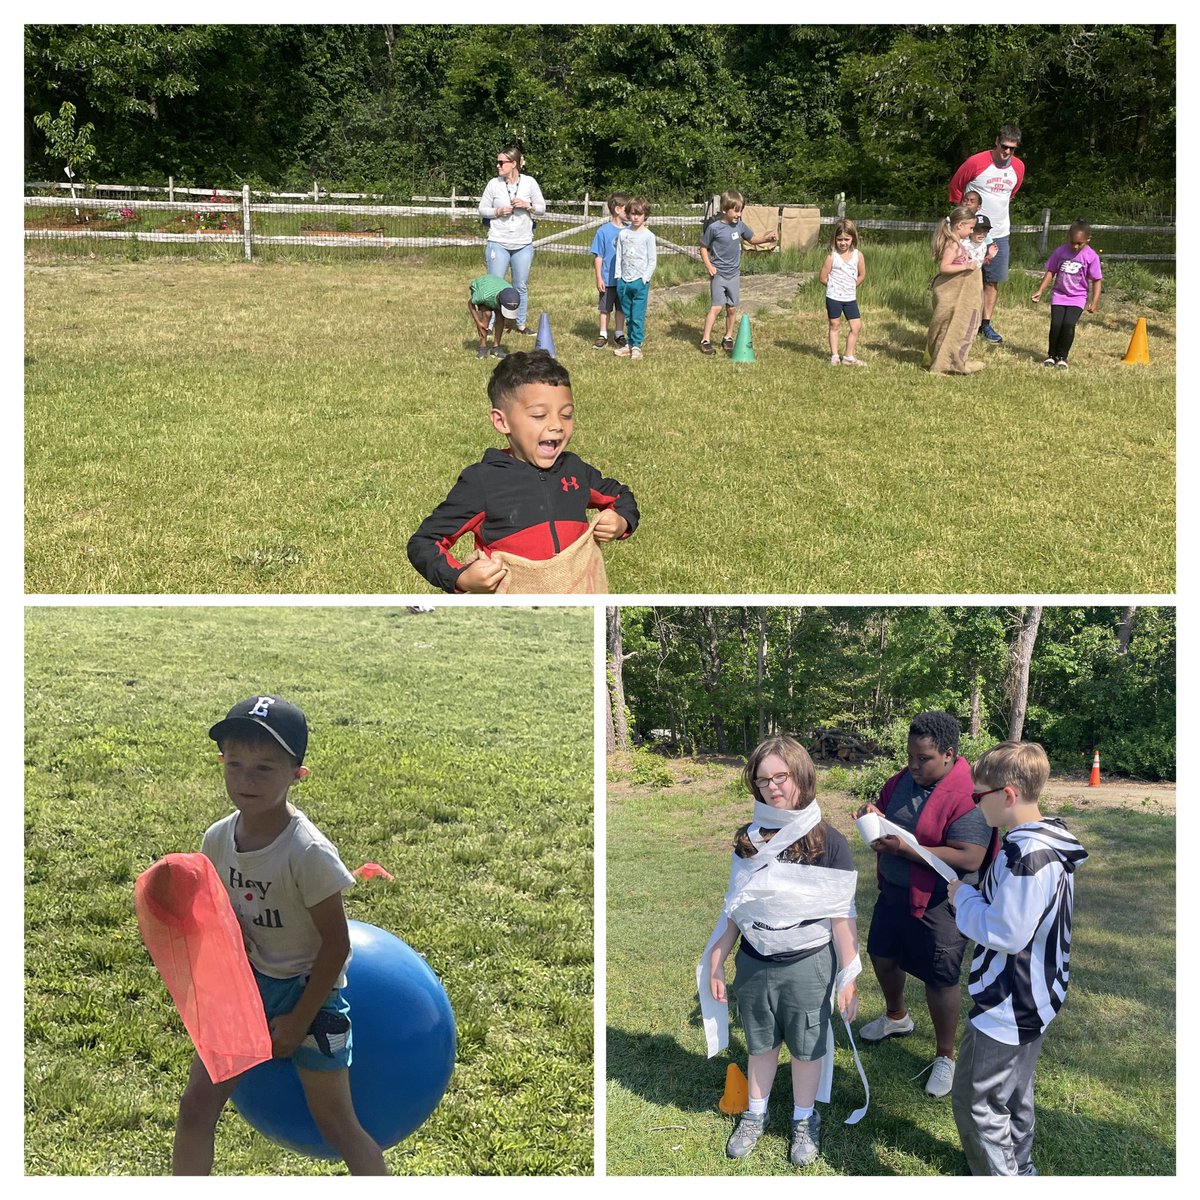 Great fun was had by all at the EES field day!